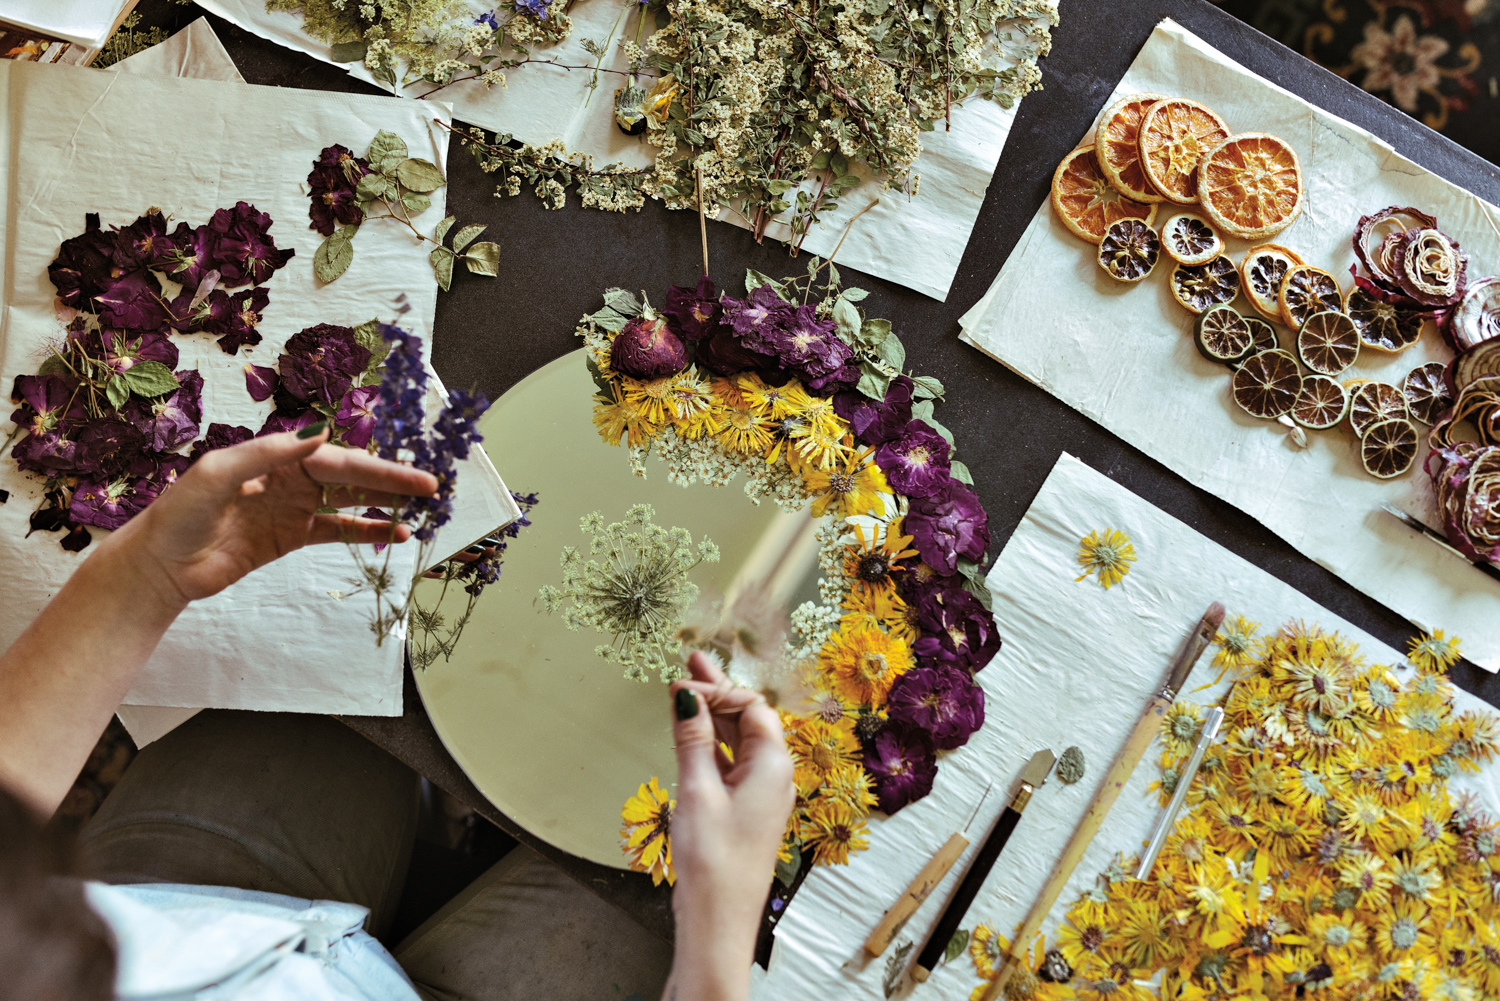 hand placing rows of flowers in rings from the outside in, with flowers on a workspace around the mirror